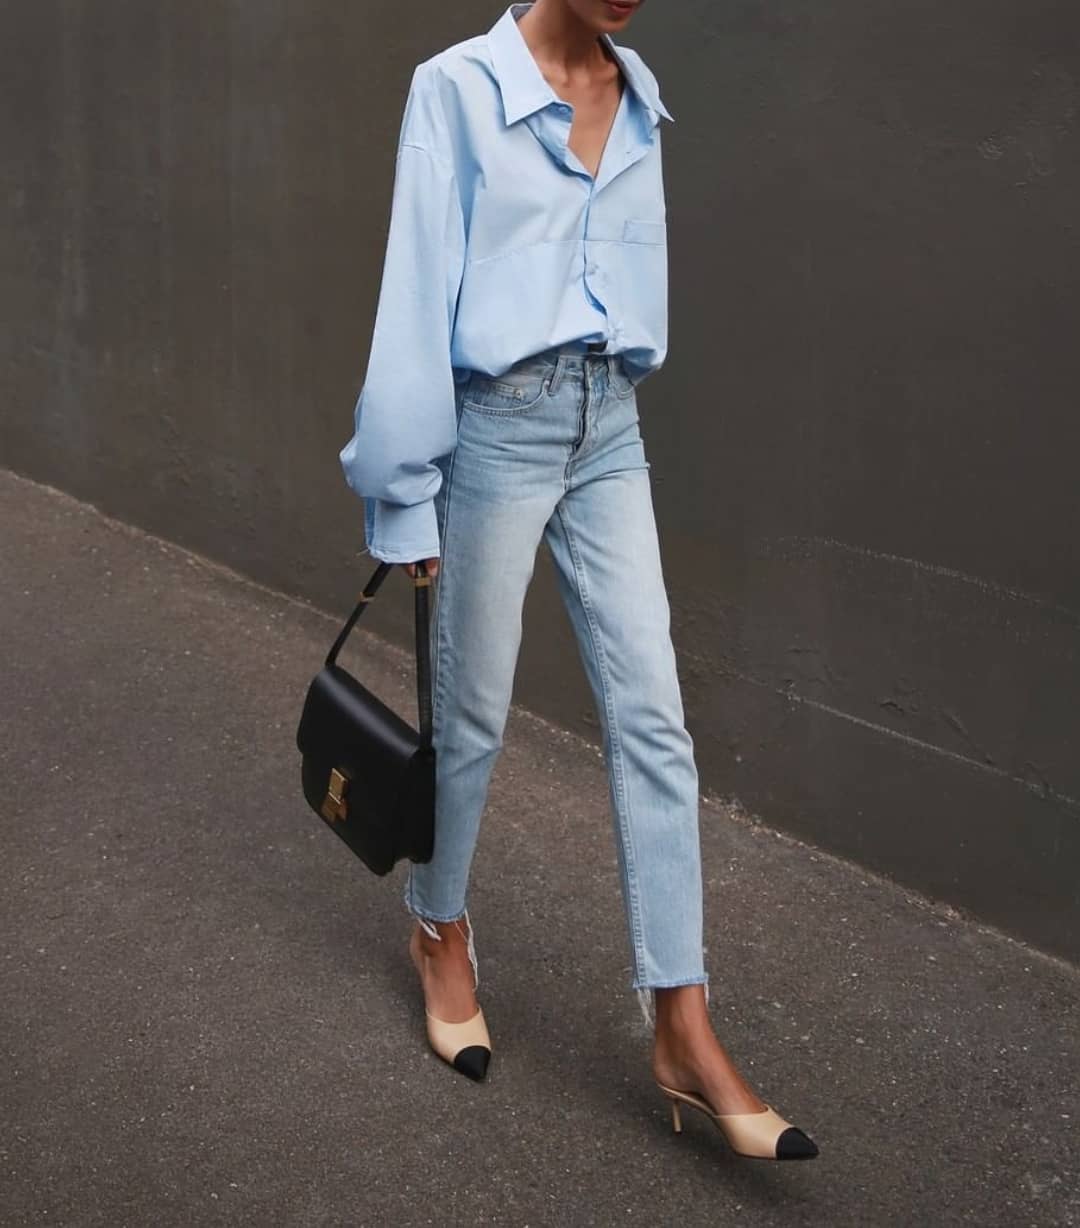 Le Fashion: We're So Into This Chic Denim Outfit